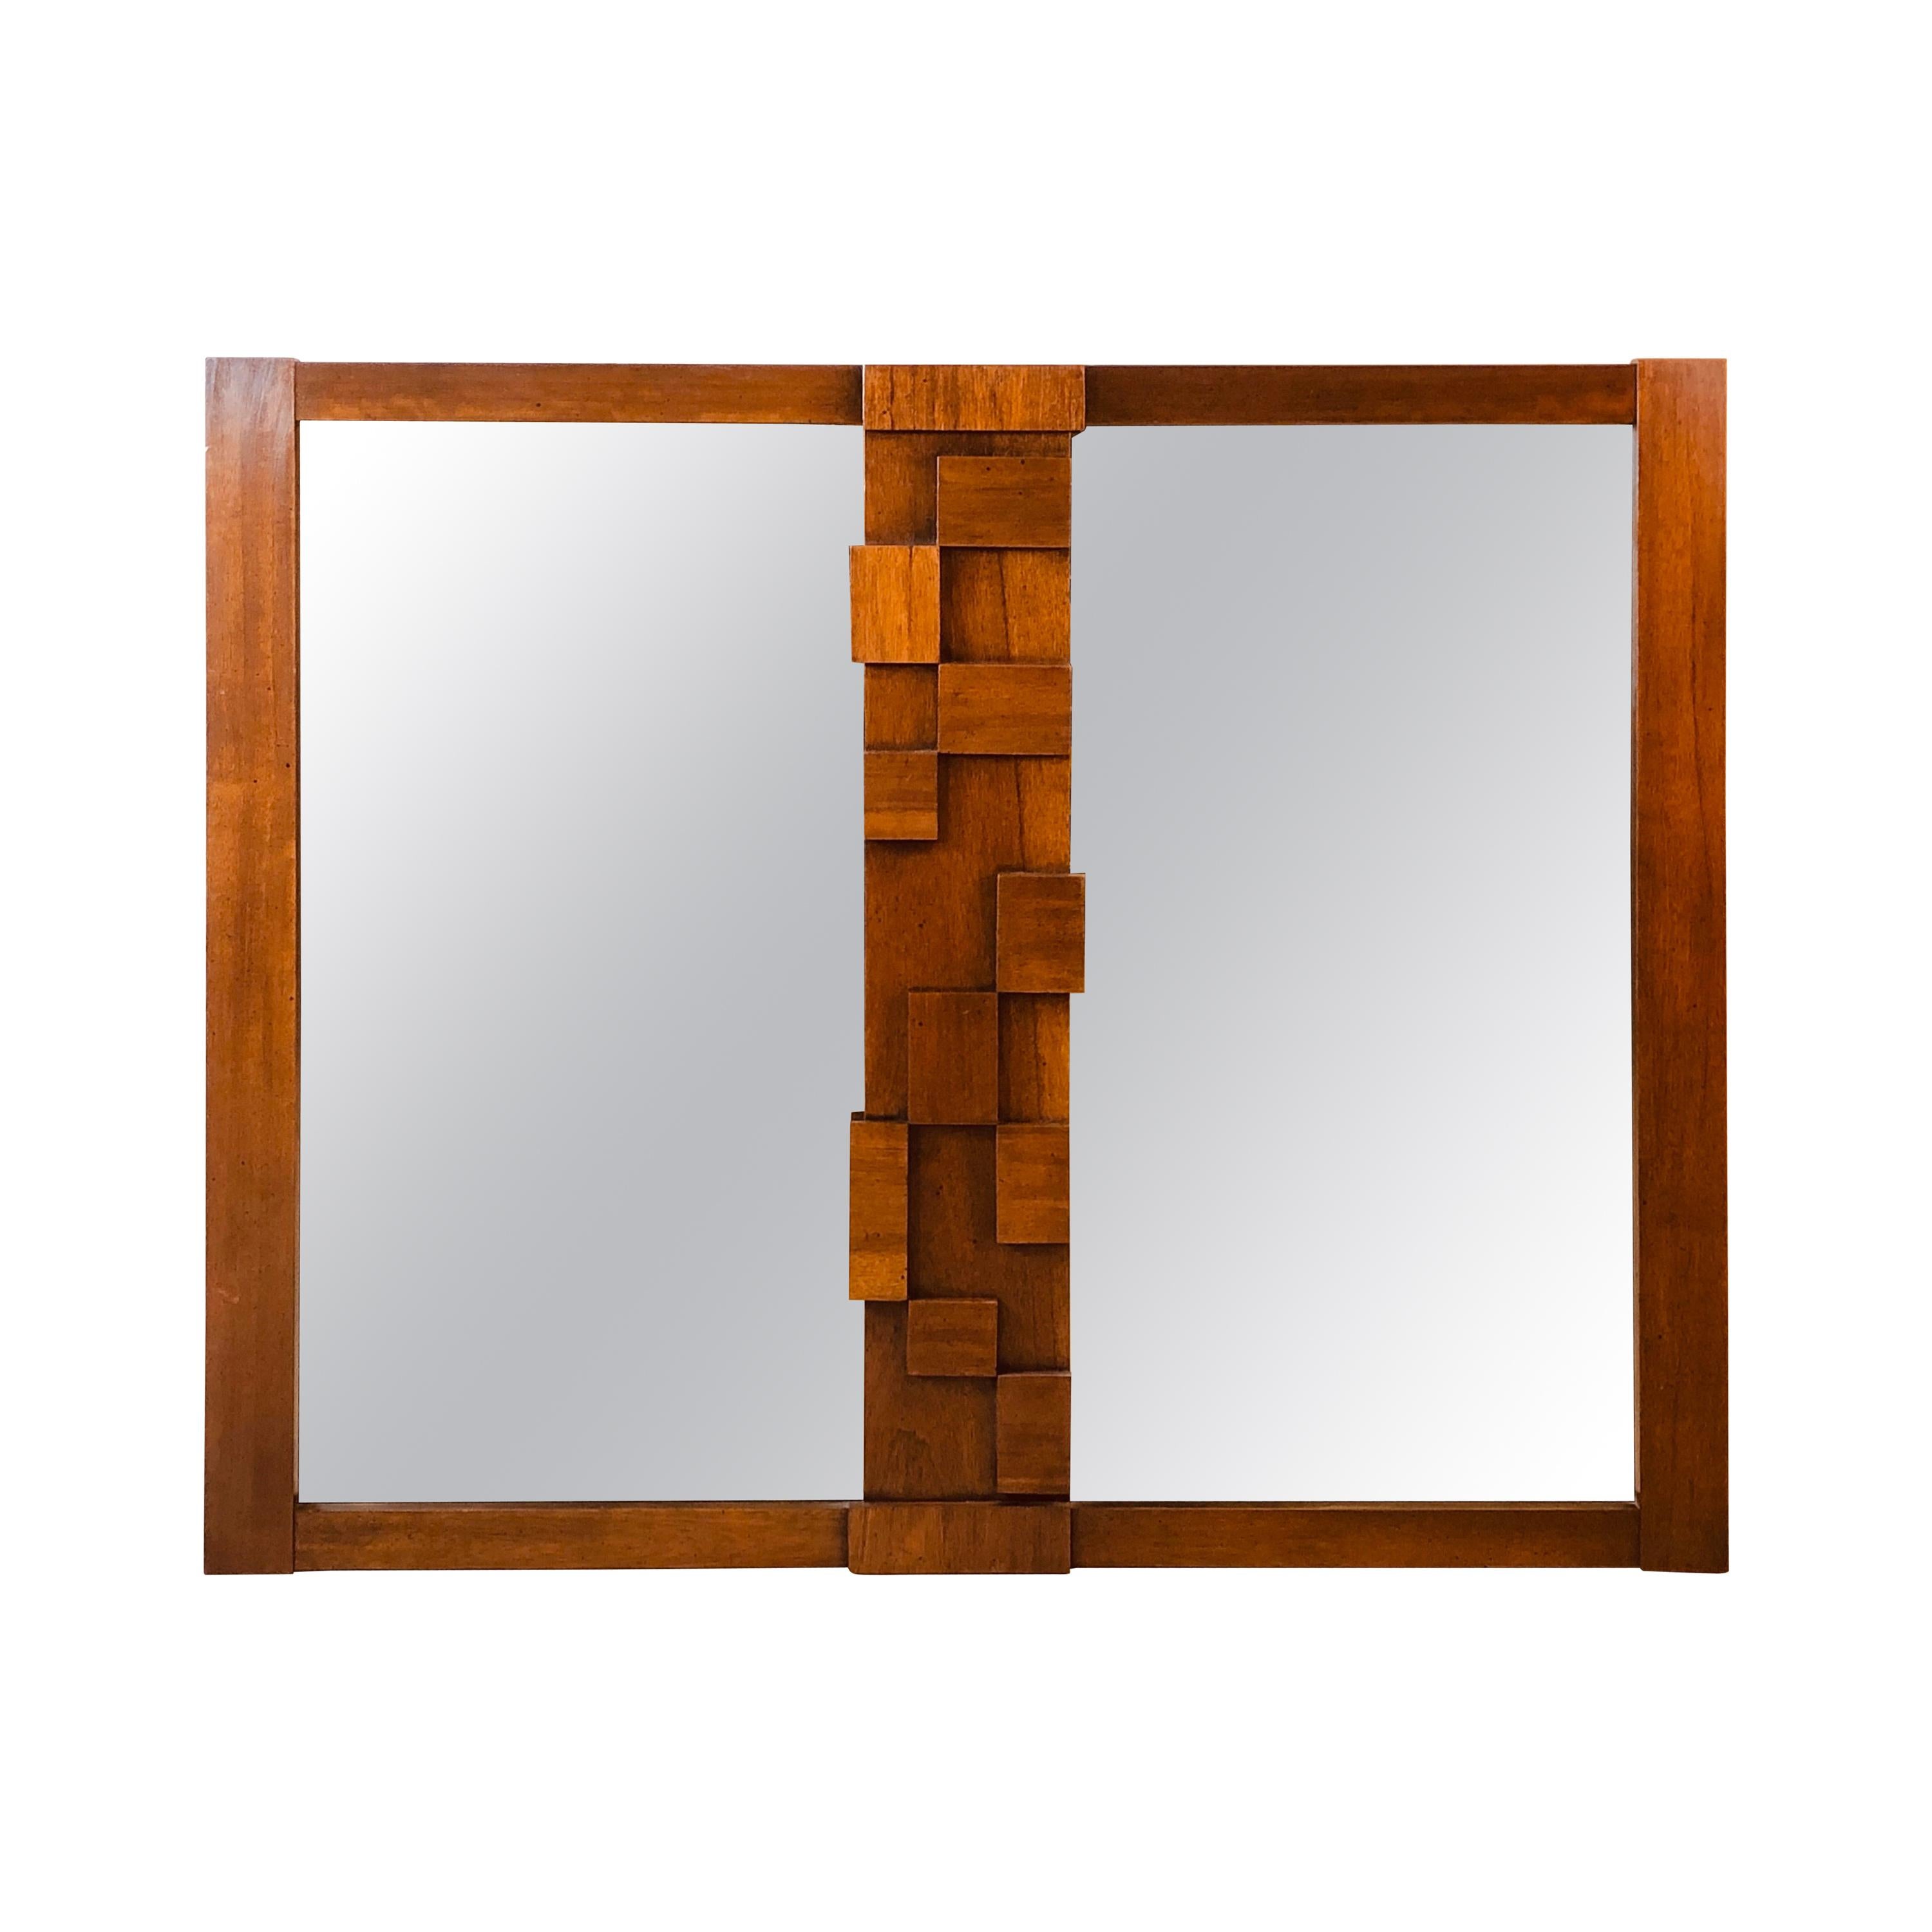 Midcentury Brutalist Style Wall Mirror For Sale